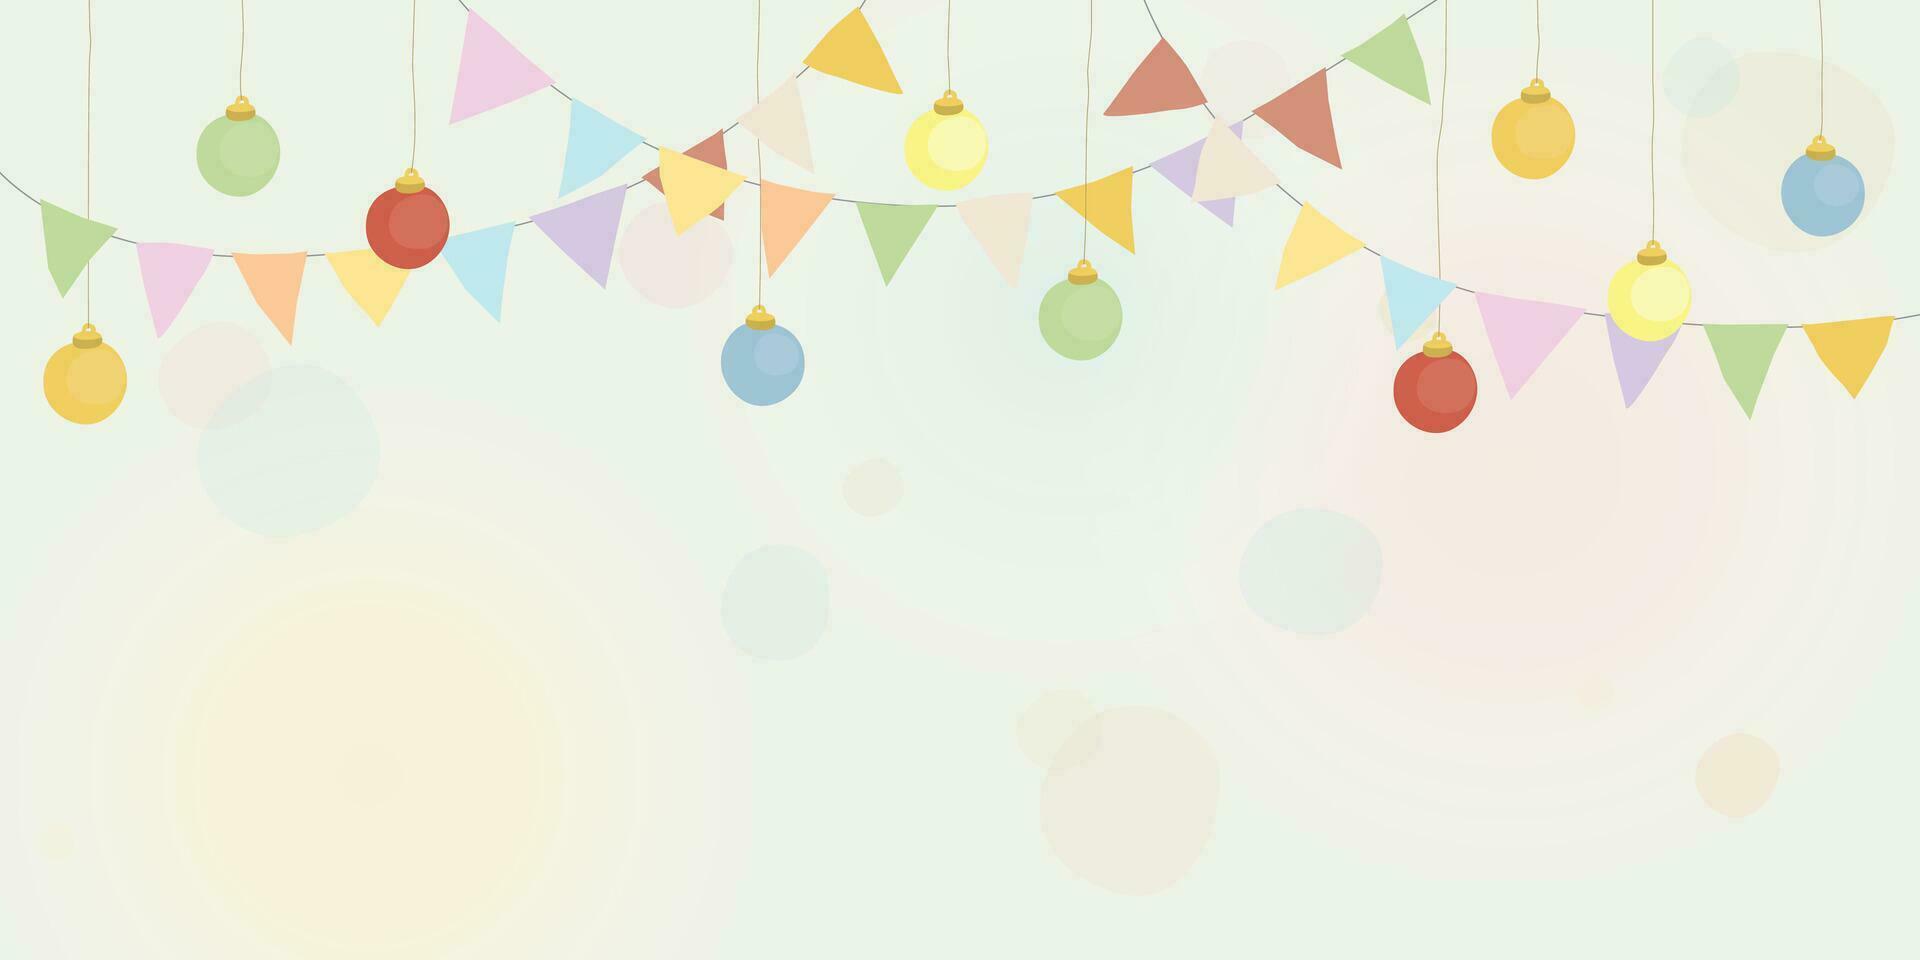 Pastel hanging flag garlands and evening balls with blurred background vector illustration childish style. Party background doodle lines template have blank space.